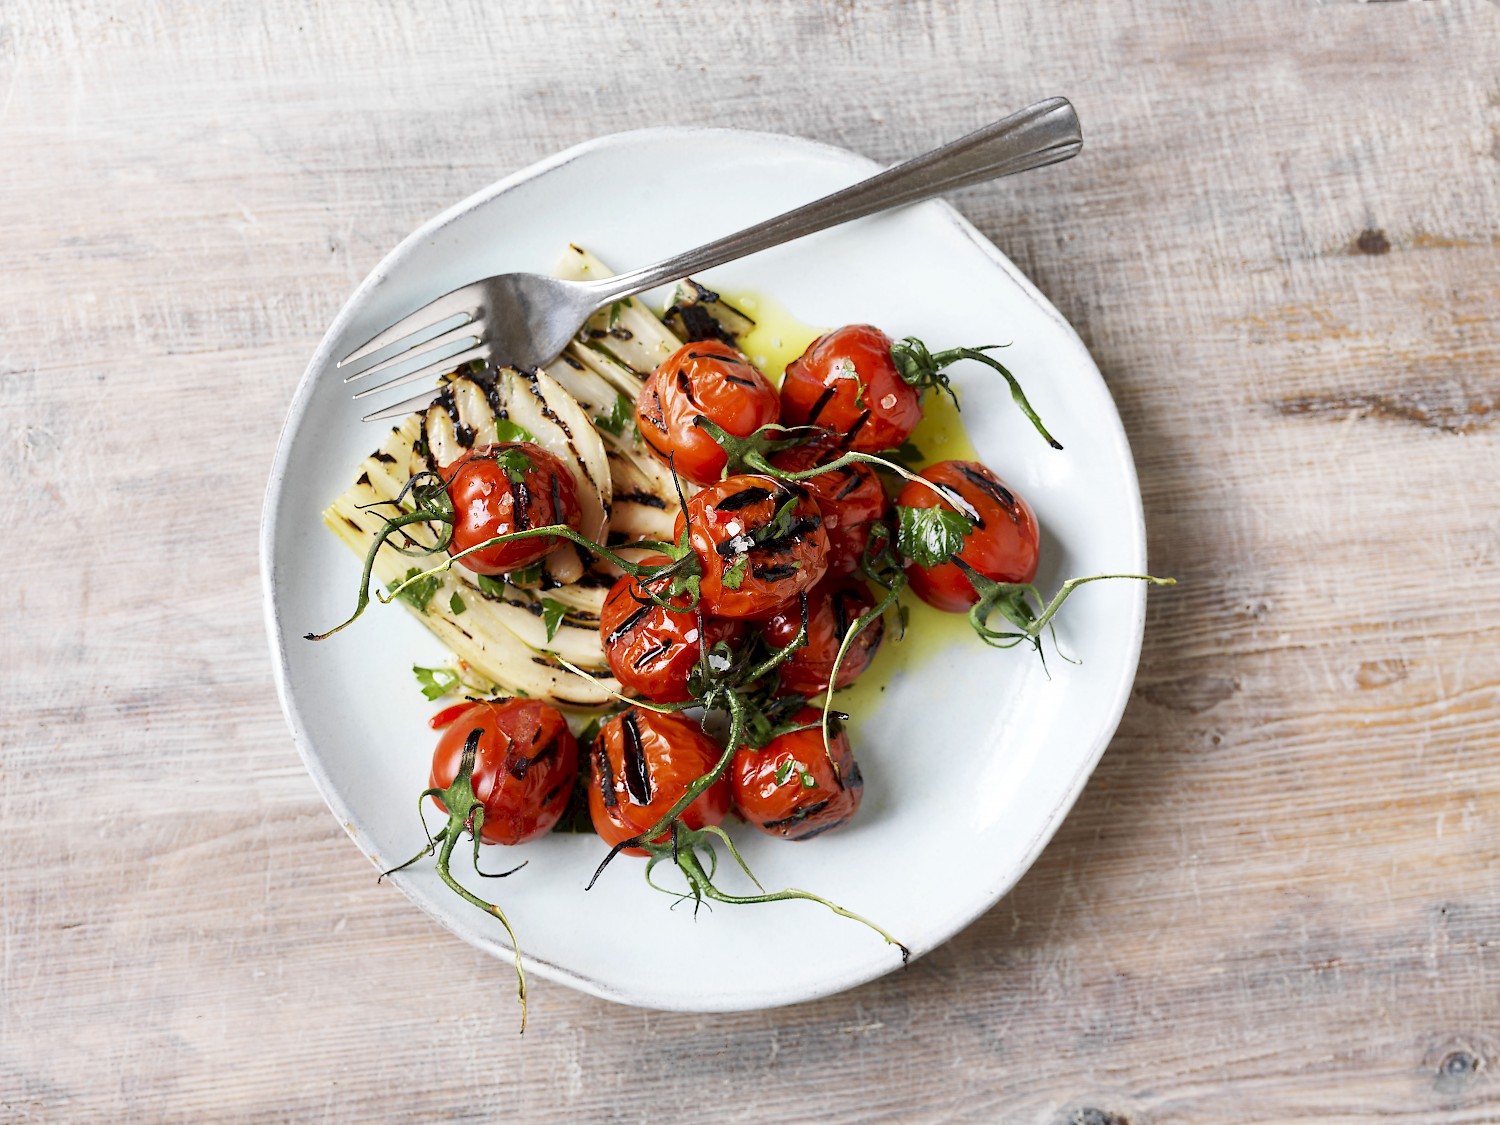 Grilled cherry tomatoes and fennel with garlic, parsley and red chili pepper